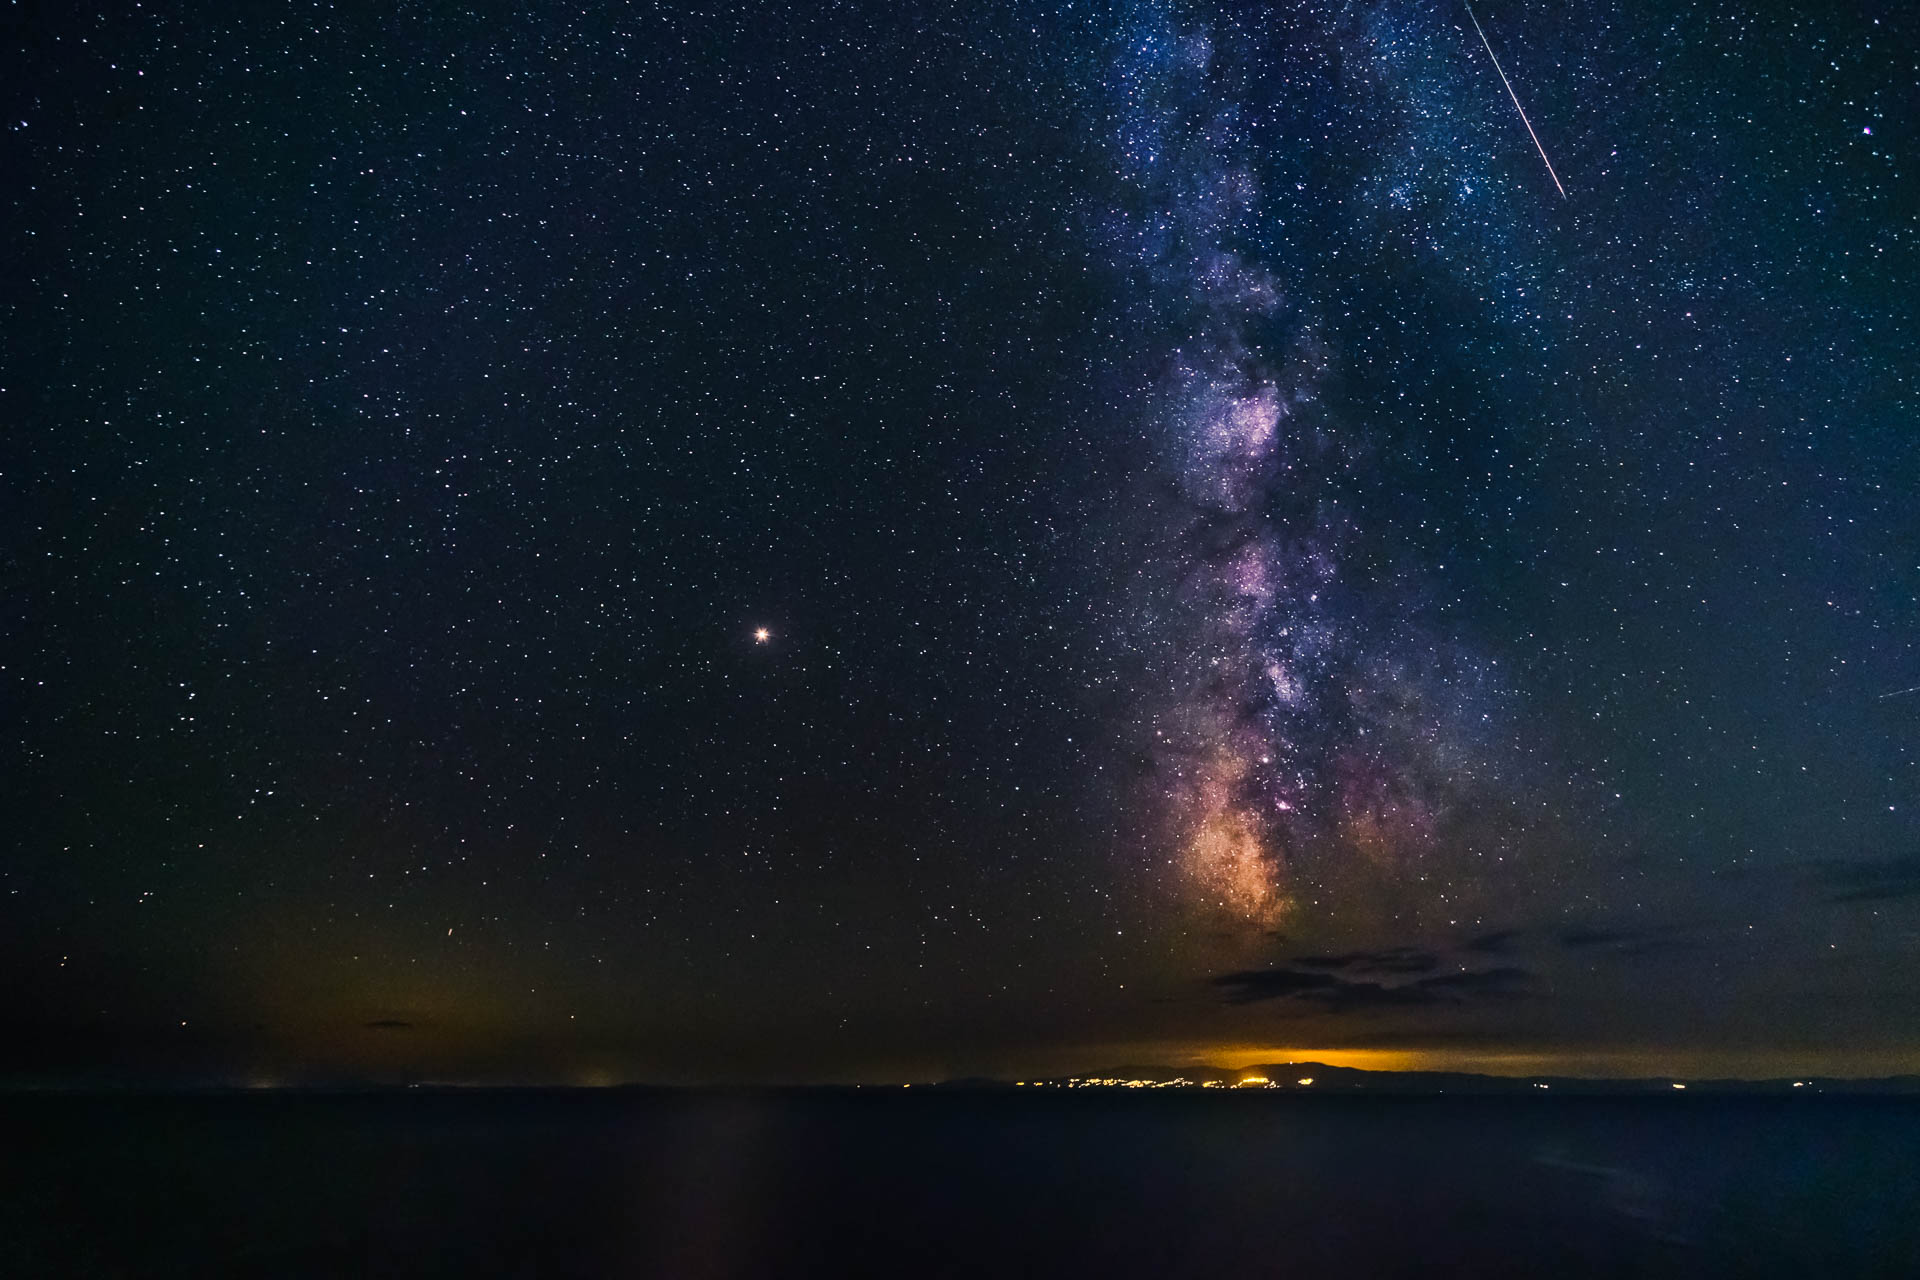 Perseids meteor shower and the milkyway